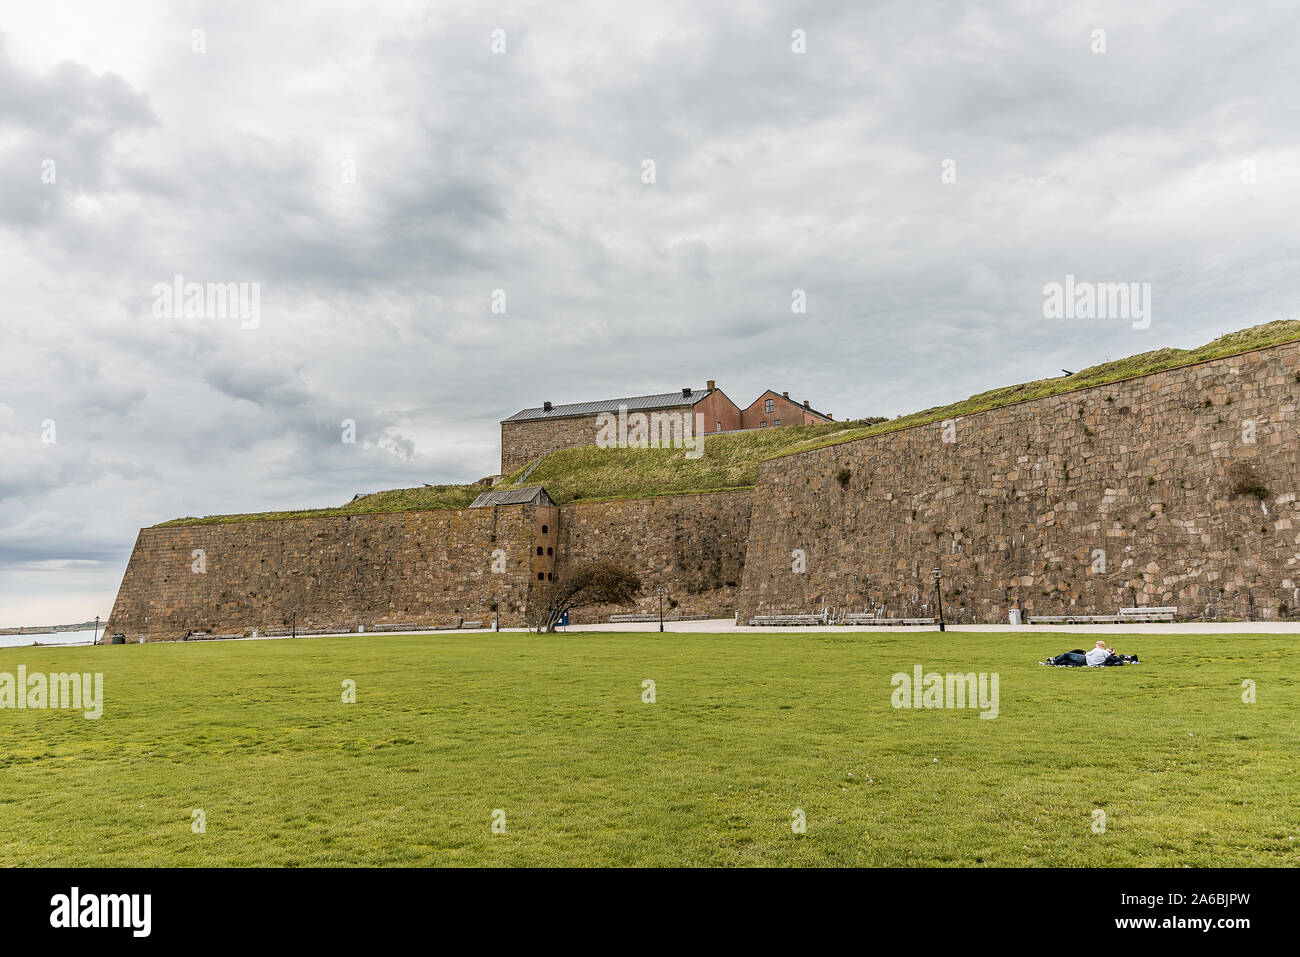 The fortress of Varberg is an old fortification, built in 1287-1300. a boy and a girl are resting on the grass in front of the walls, Varberg, Seweden Stock Photo